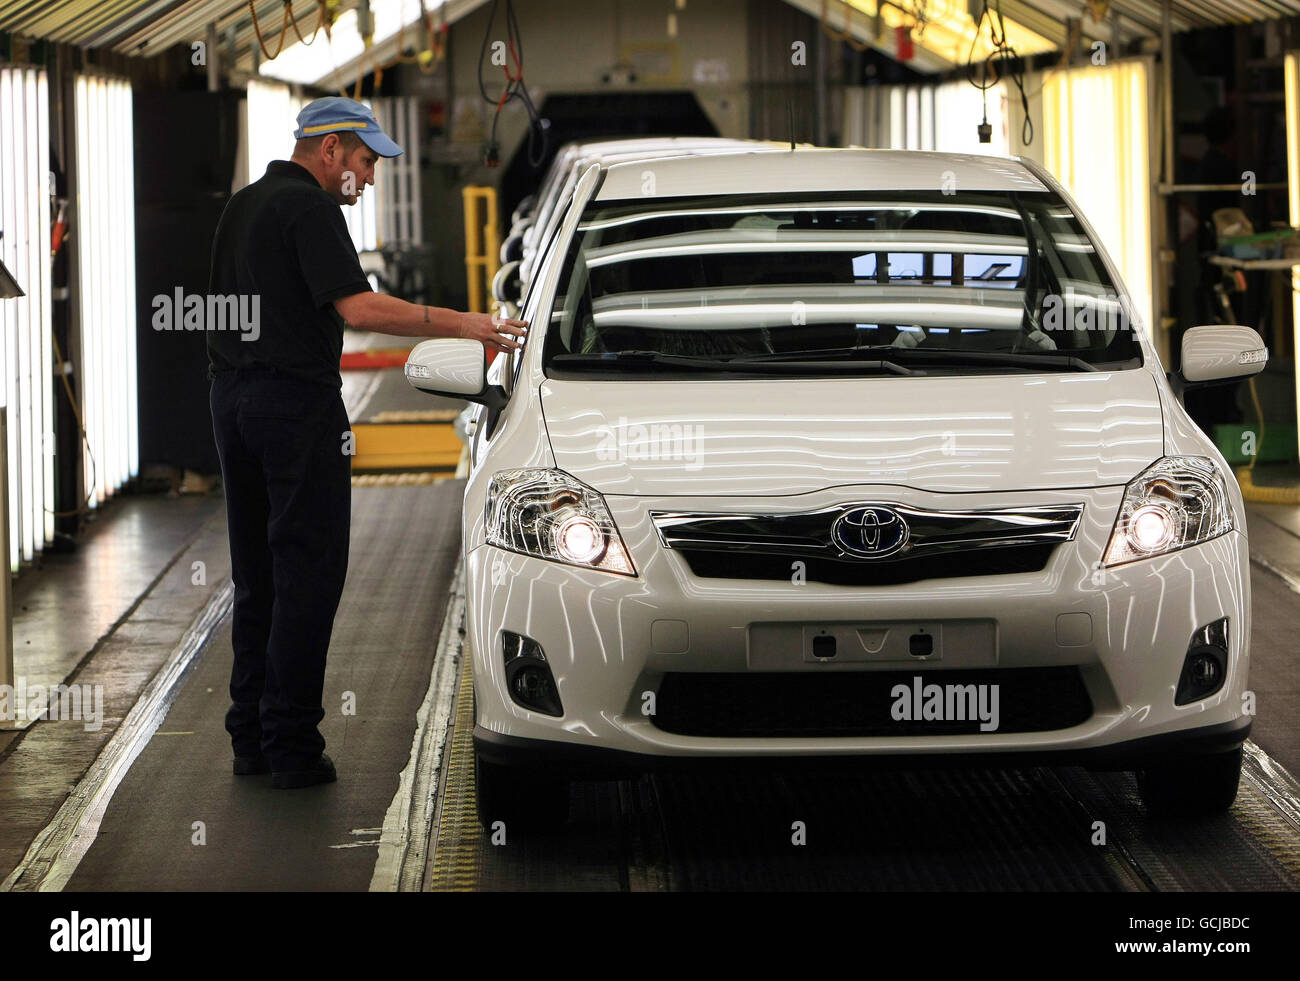 A Toyota Auris Hybrid Synergy Drive (HSD) car go through final inspection as it is unveiled at the company's Burnaston plant near Derby. It is the first full hybrid vehicle to be produced in Europe. Stock Photo